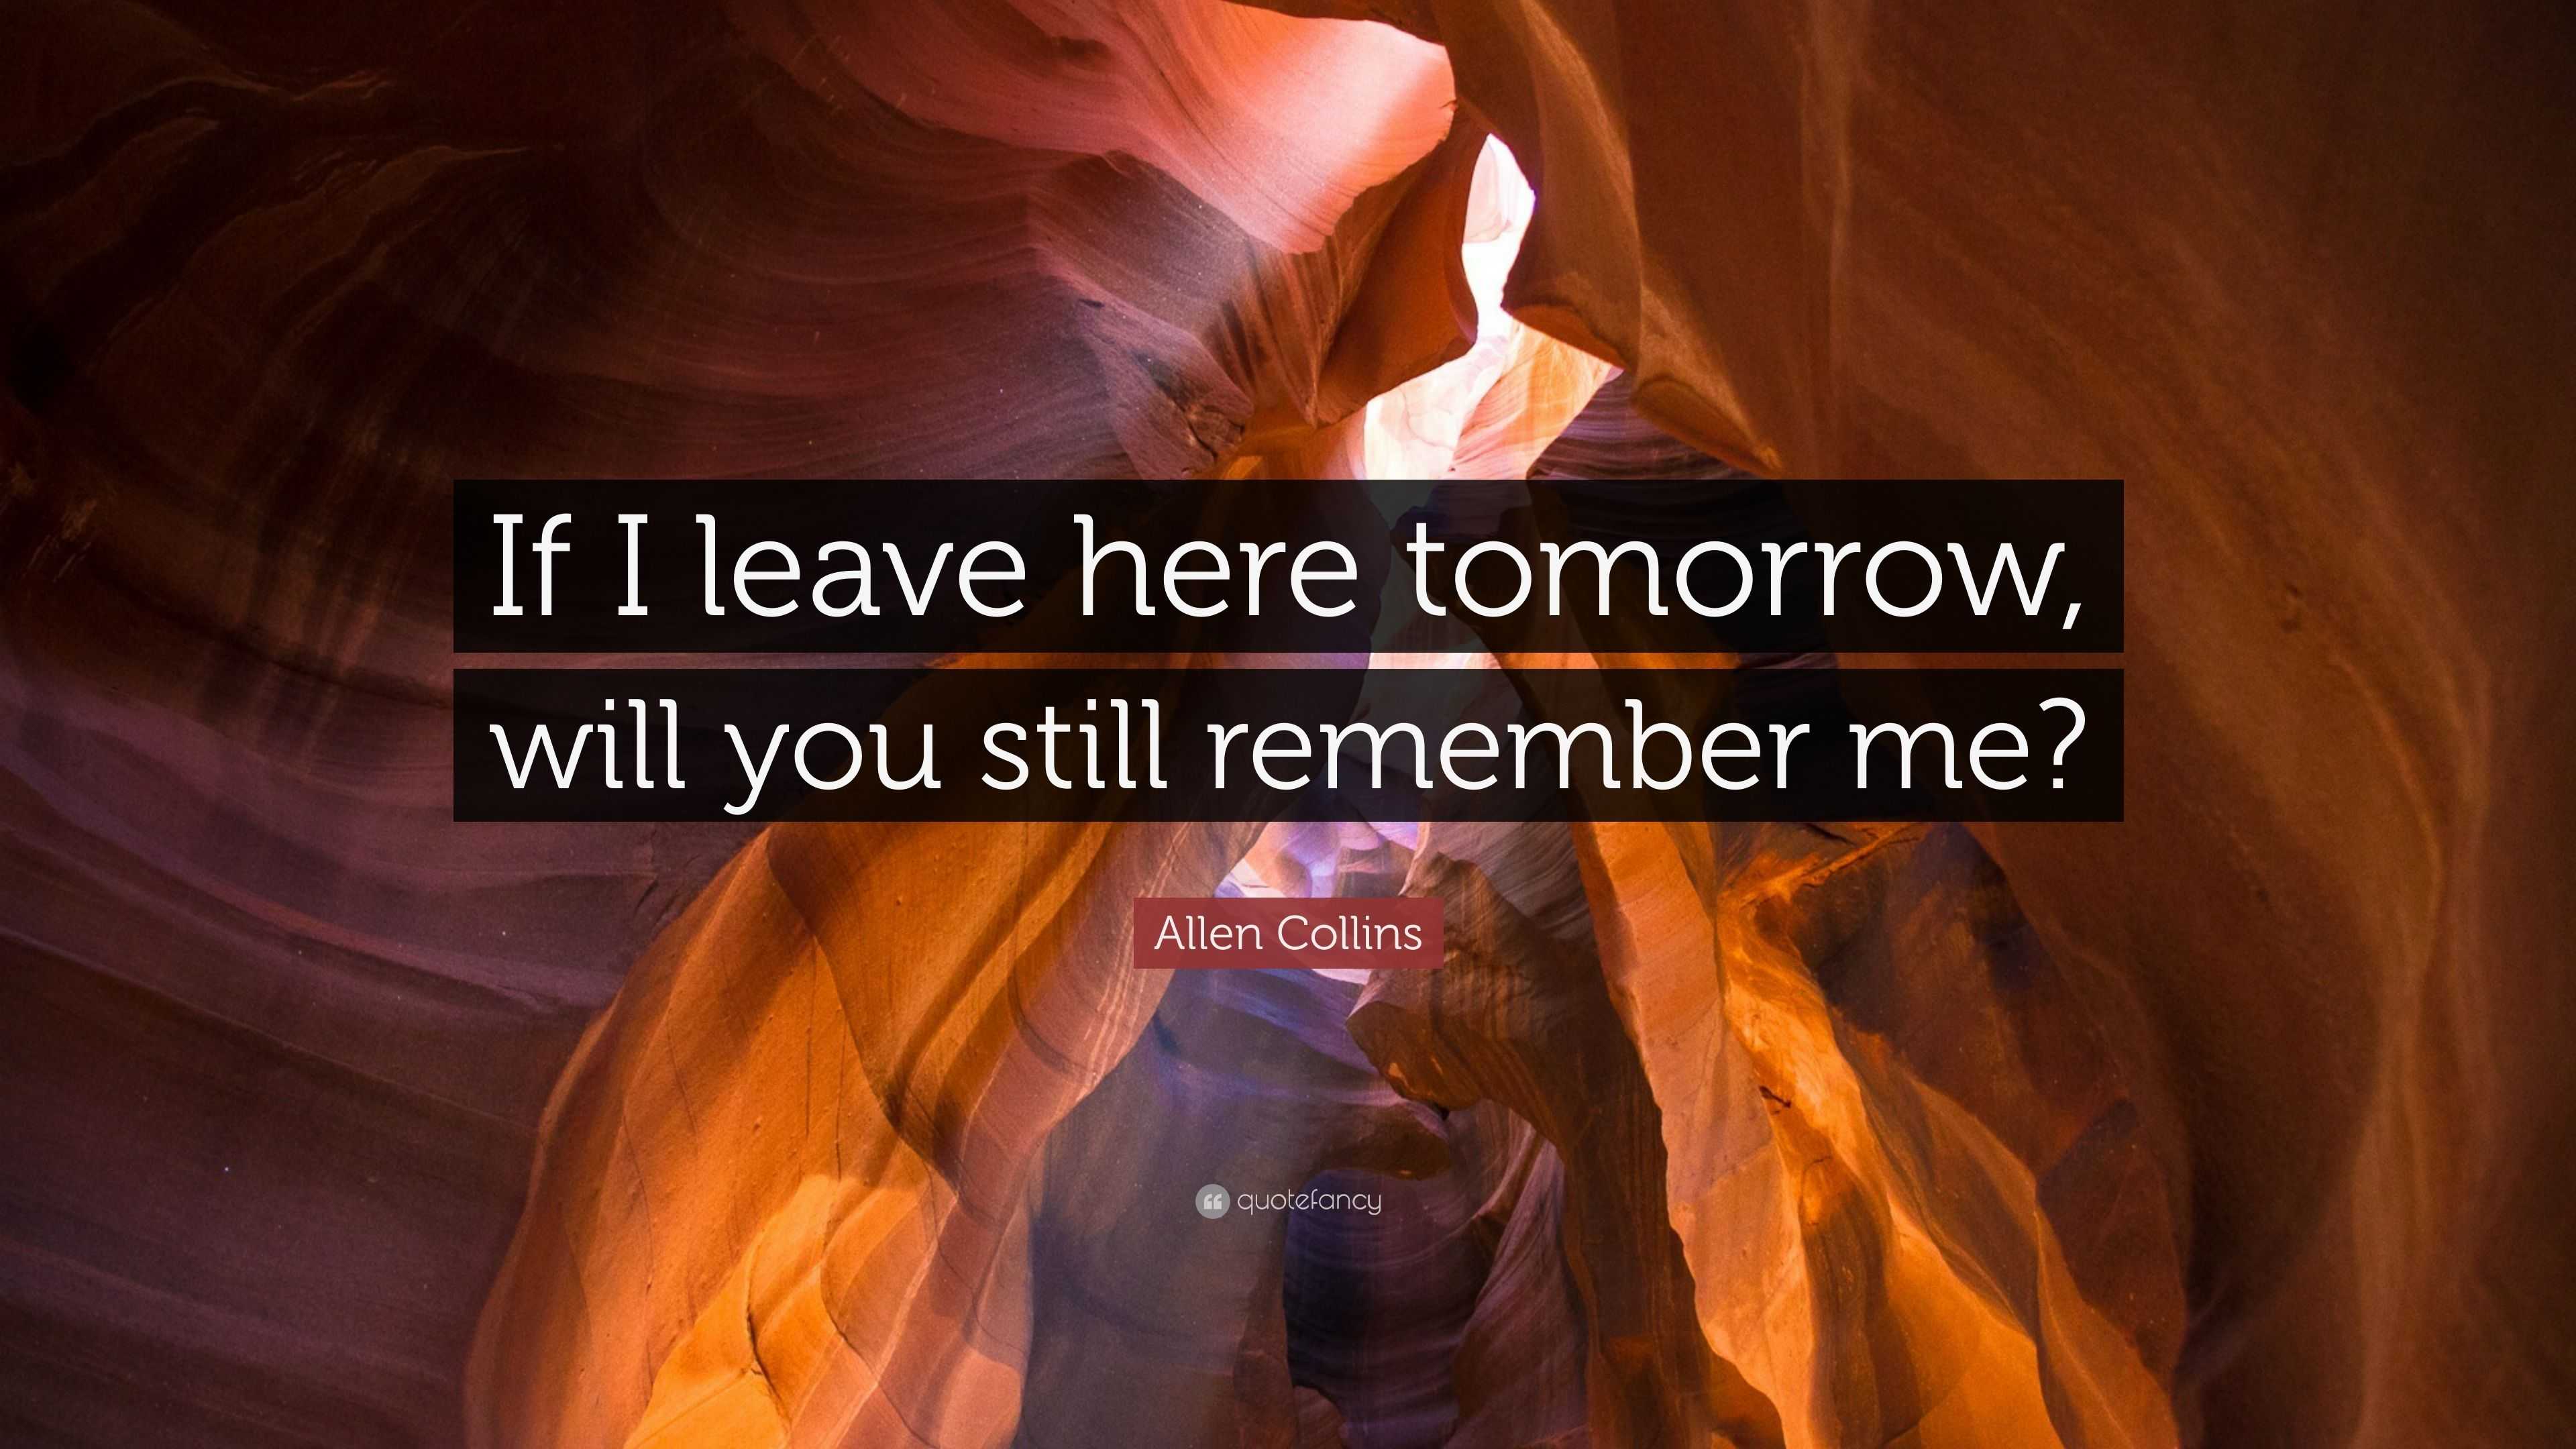 Allen Collins Quote: “If I leave here tomorrow, will you still remember